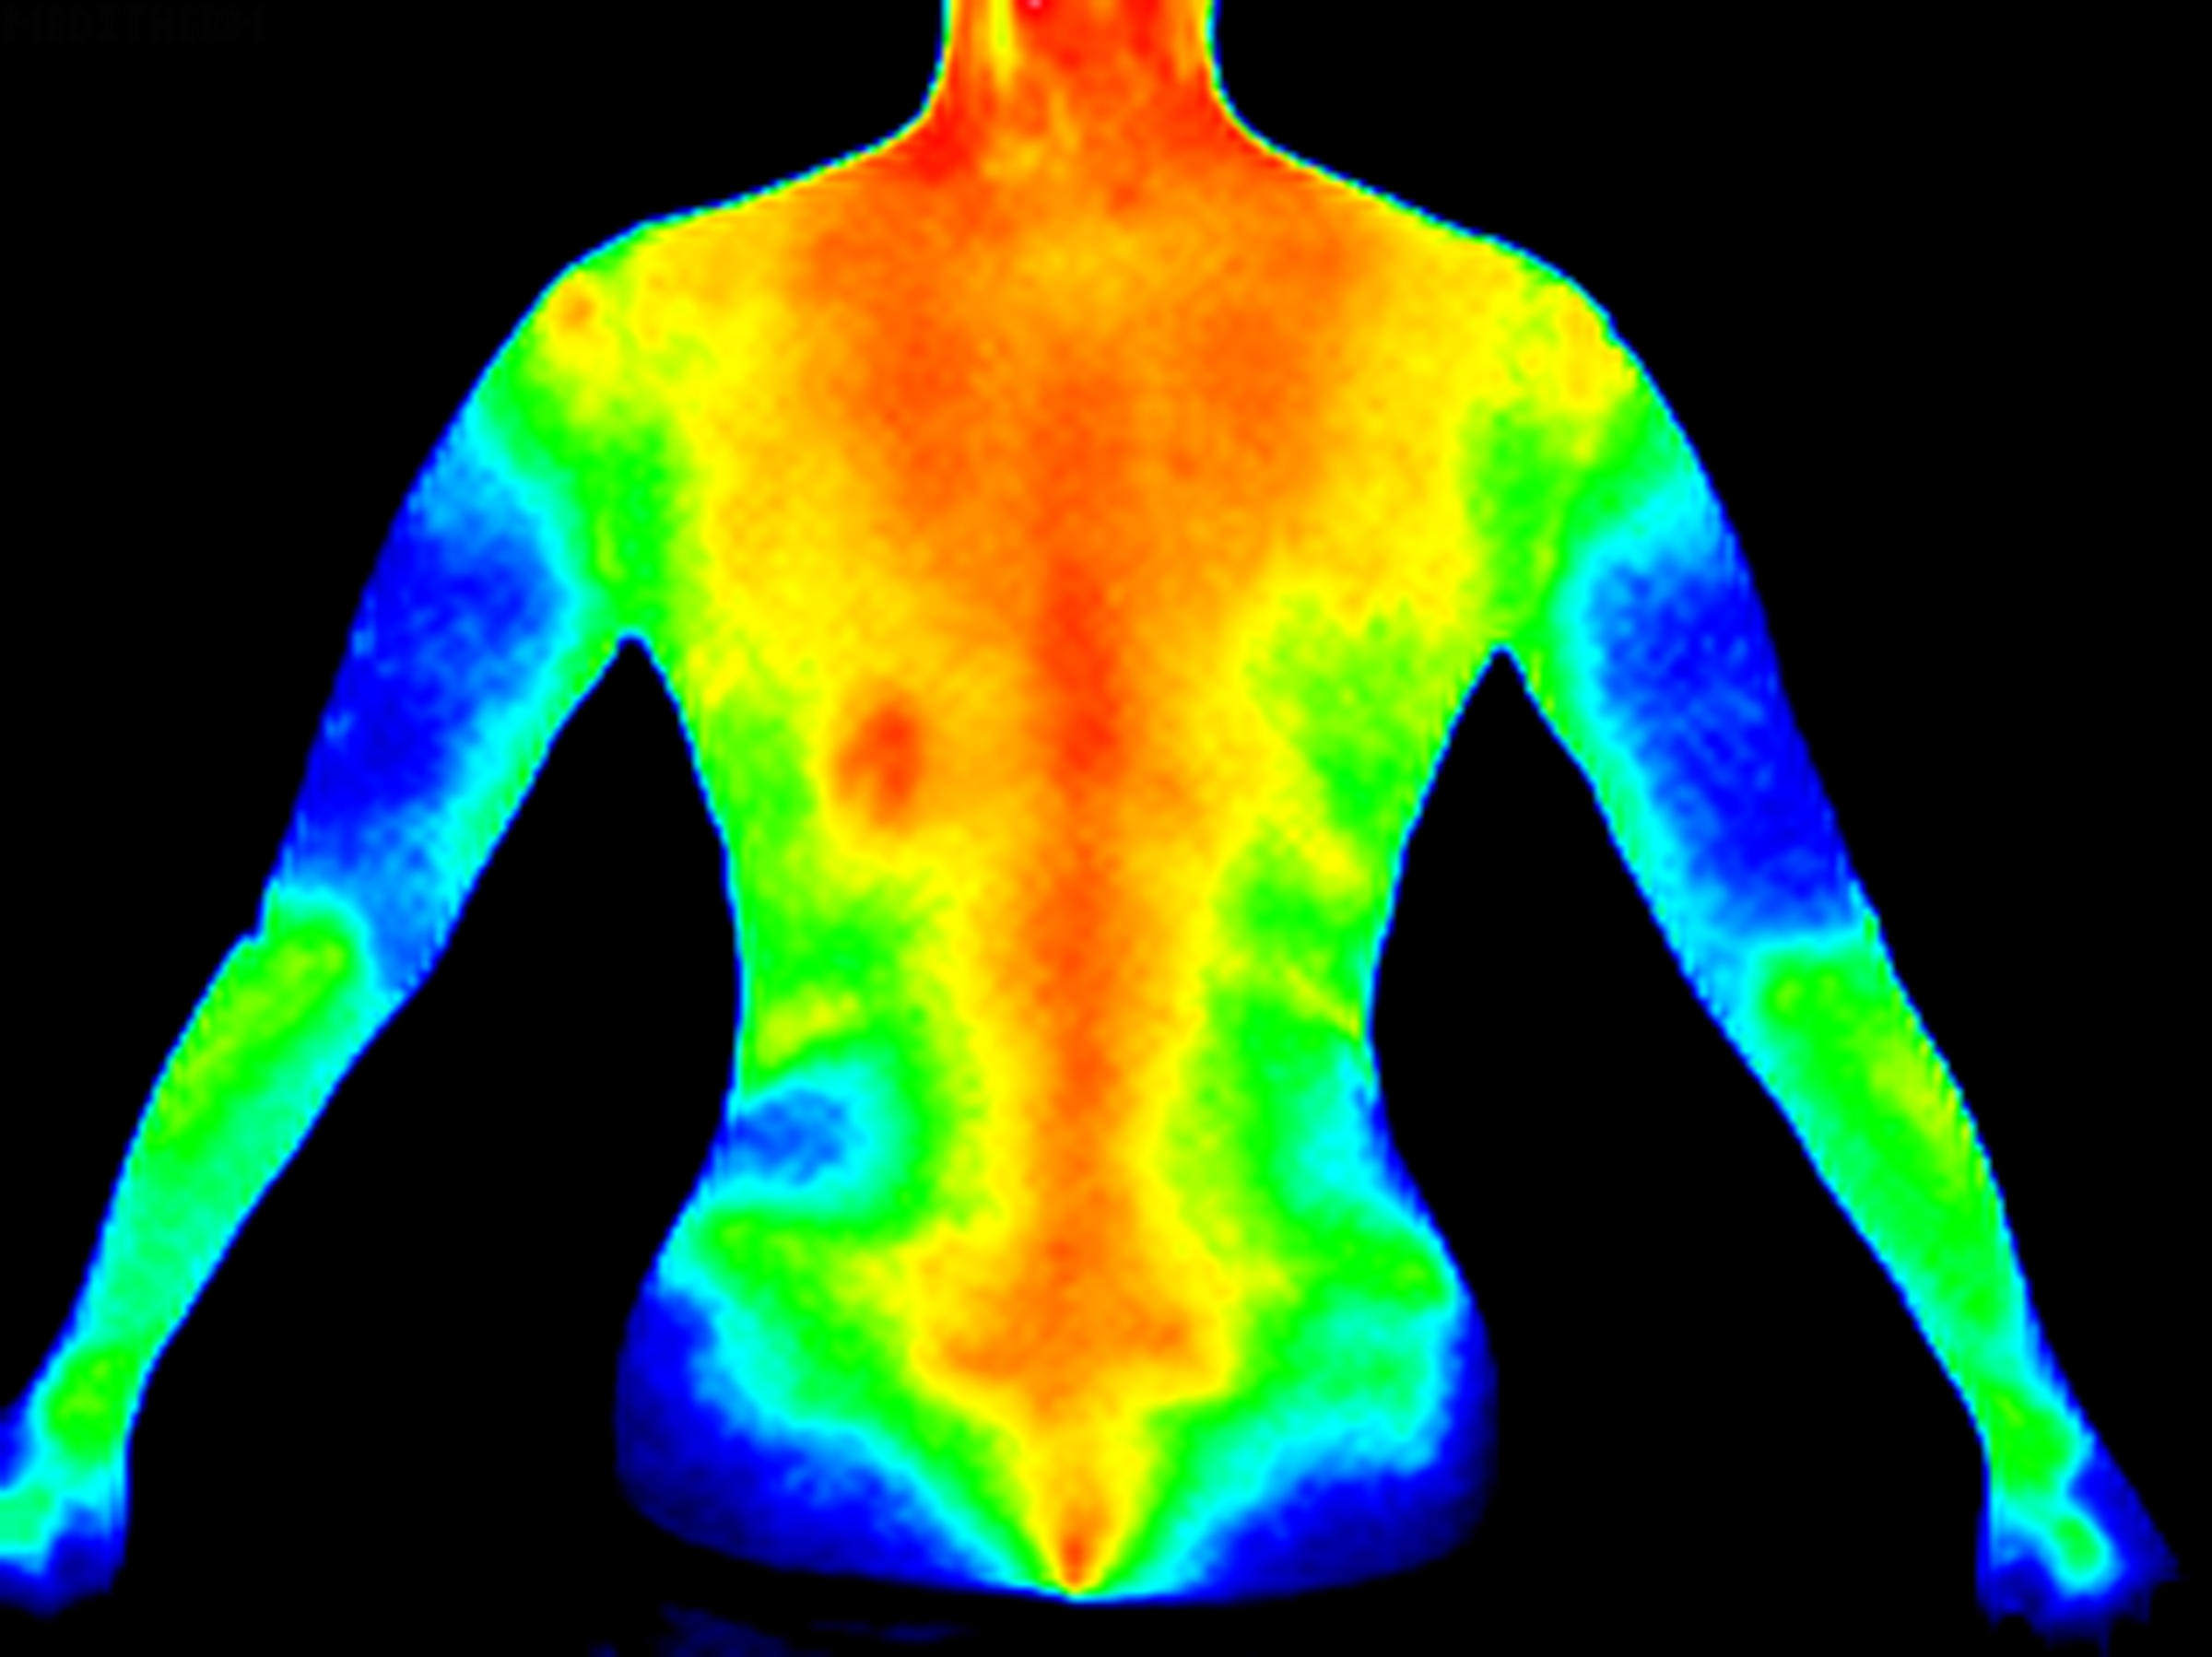 Thermographic photo image of the back of the upper body of a woman with the photo showing different temperature in a range of colors from blue showing cold to red showing hot which can indicate joint inflammation. Shows the complete spine.